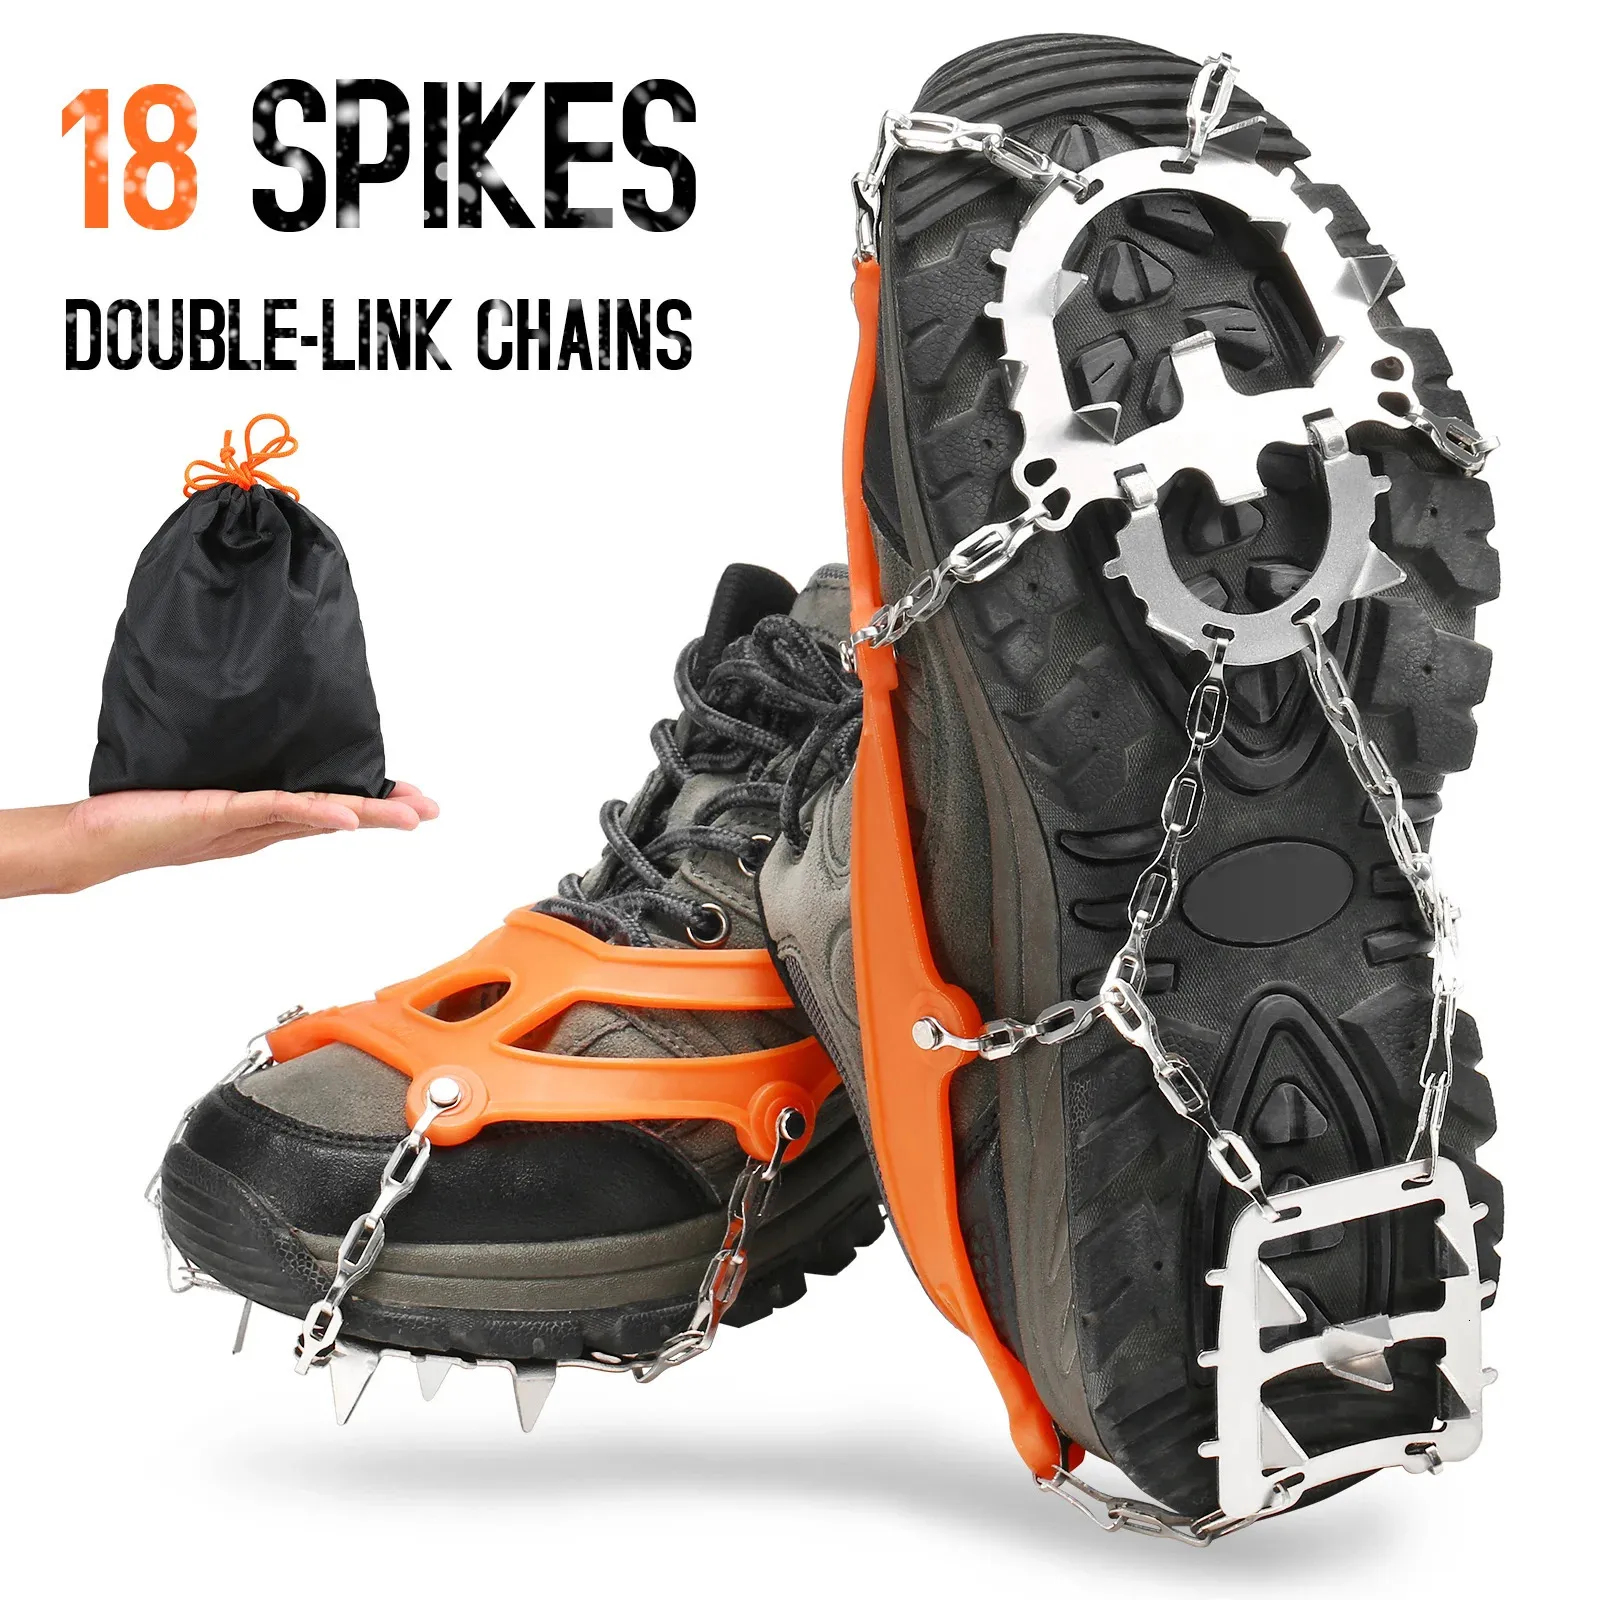 Mountaineering Crampons No lumping Crampon 18 Spikes Traction Cleats Women Men Anti-slip Ice Snow Grip with Storage Pouch Walking Hiking Fishing Crampon 231114